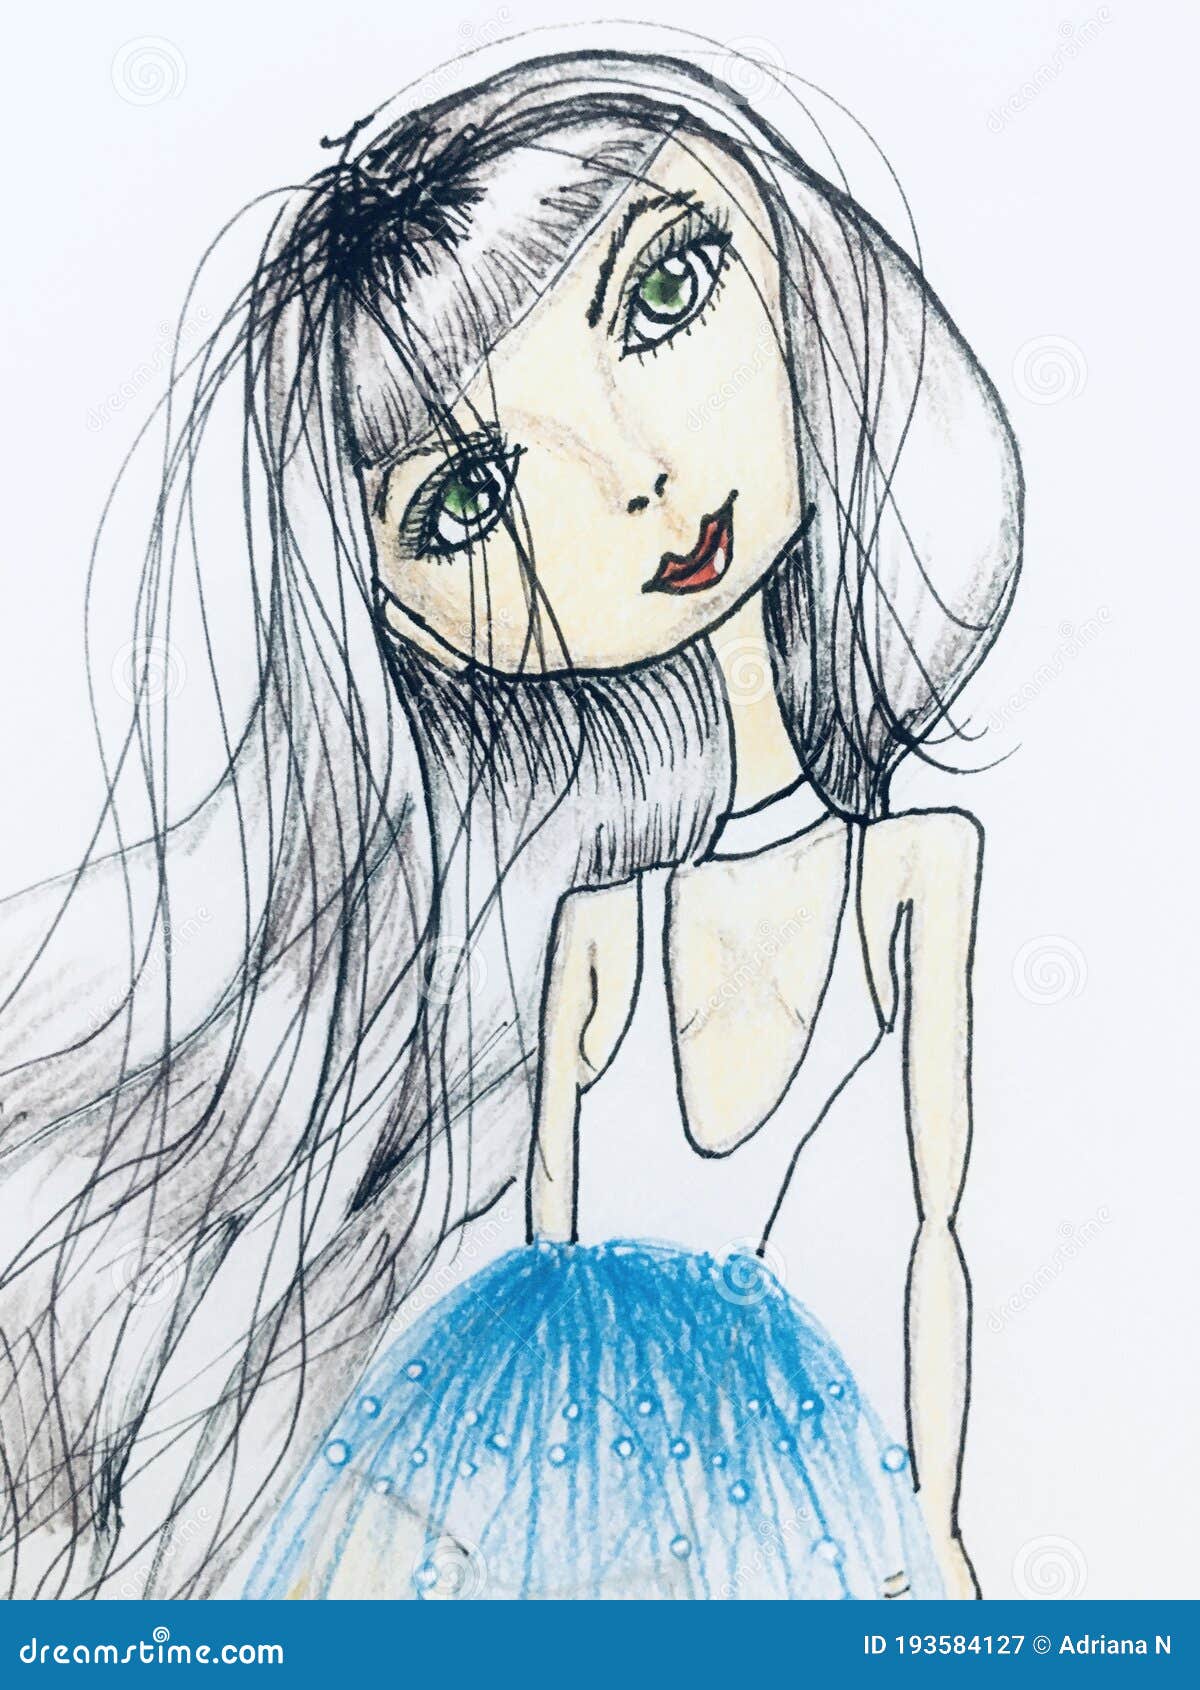 Draw of a Girl with Straight Hair Stock Image - Image of blue, skirt:  193584127